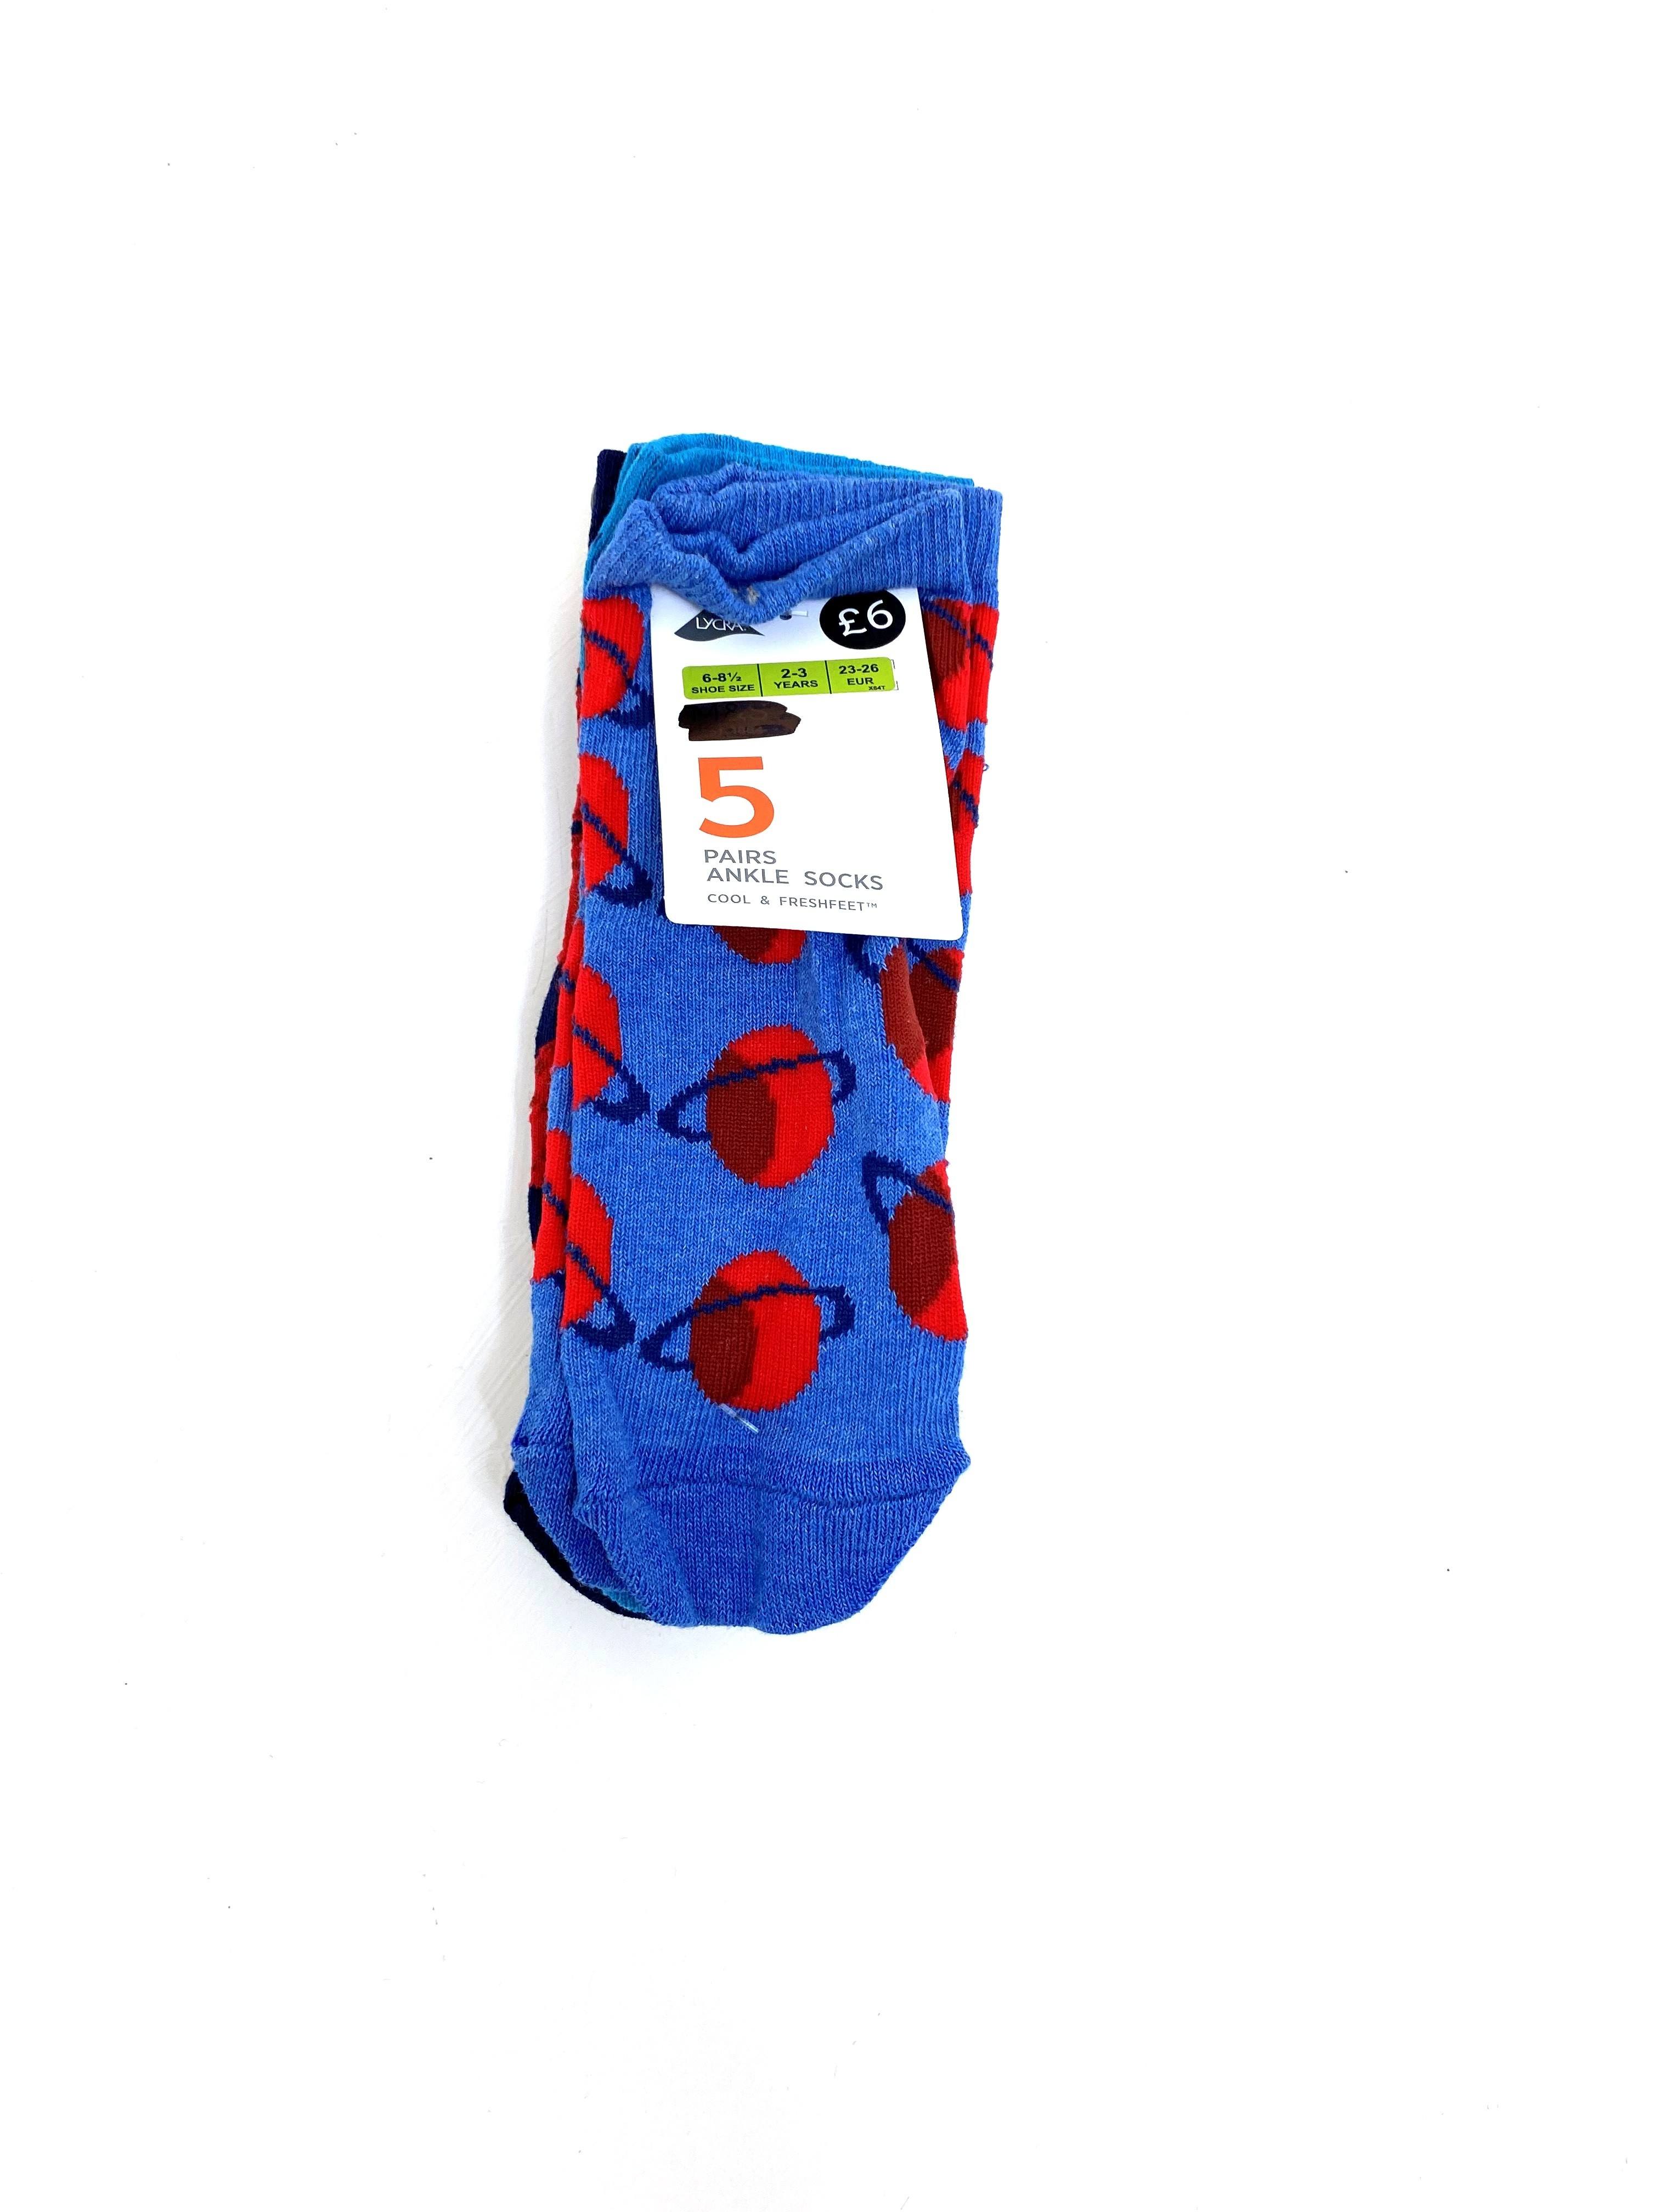 REDUCED PRICE Ex Store 'Space' Boys 5 Pairs of Boys Socks PACK 12